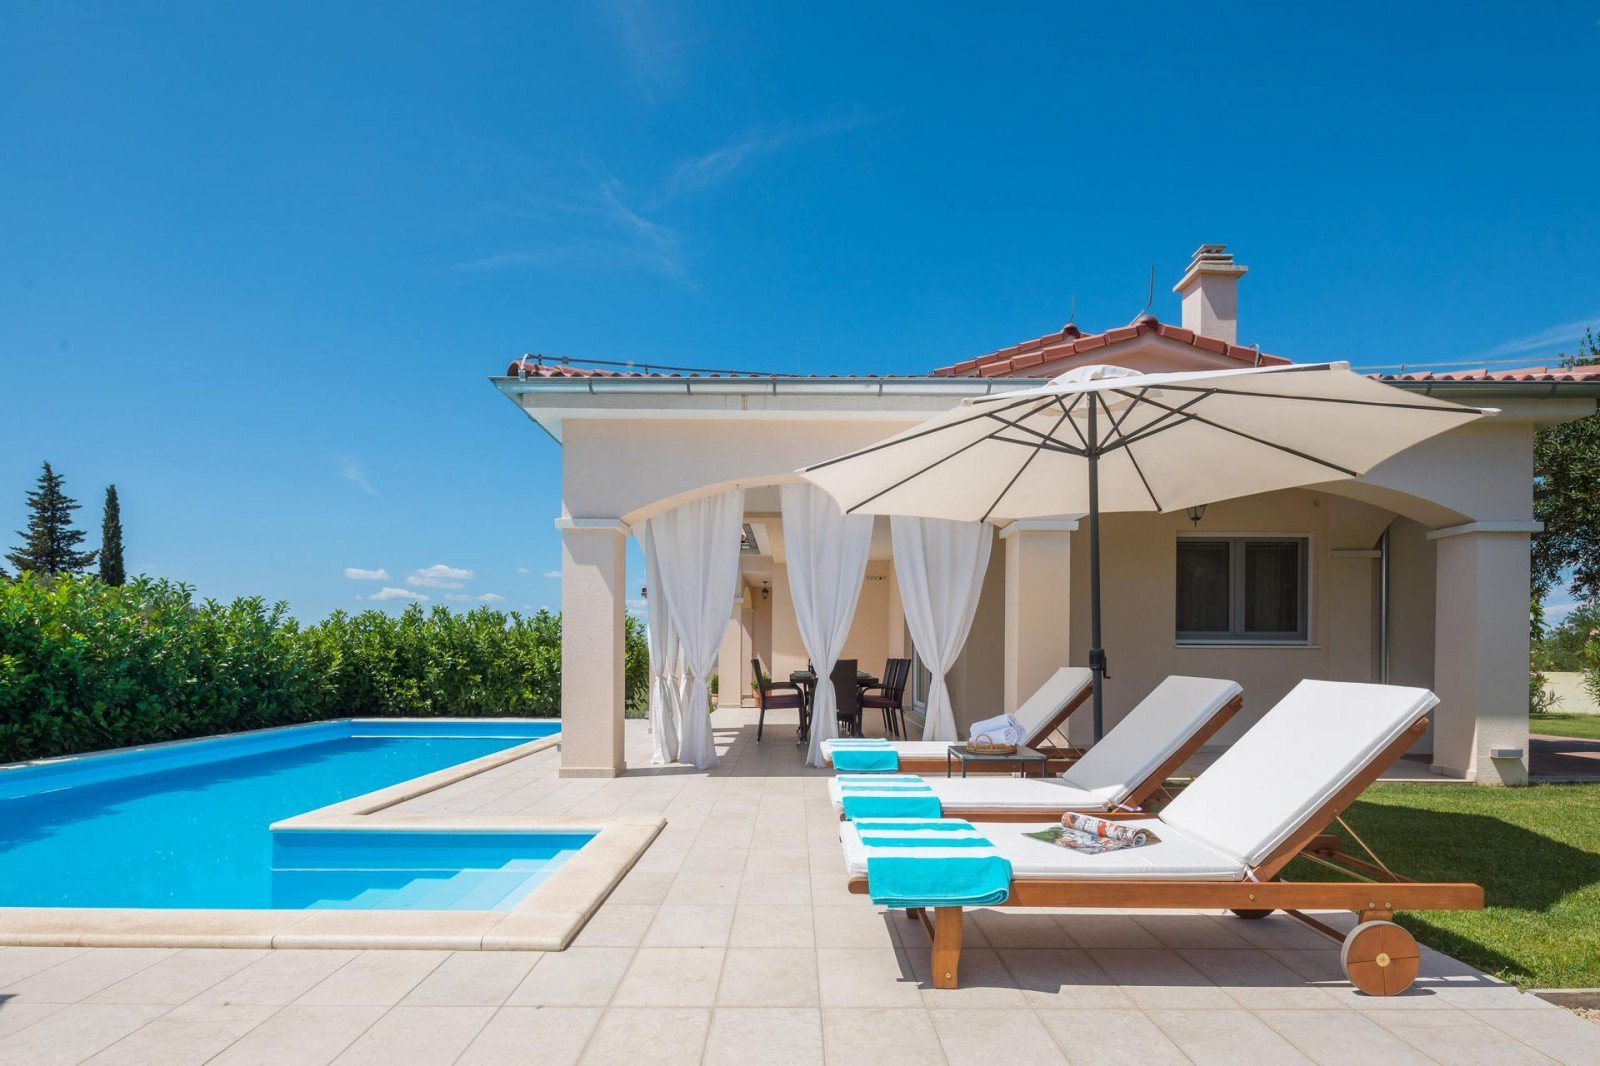 Why choose a villa instead of a hotel for your holiday accommodation?